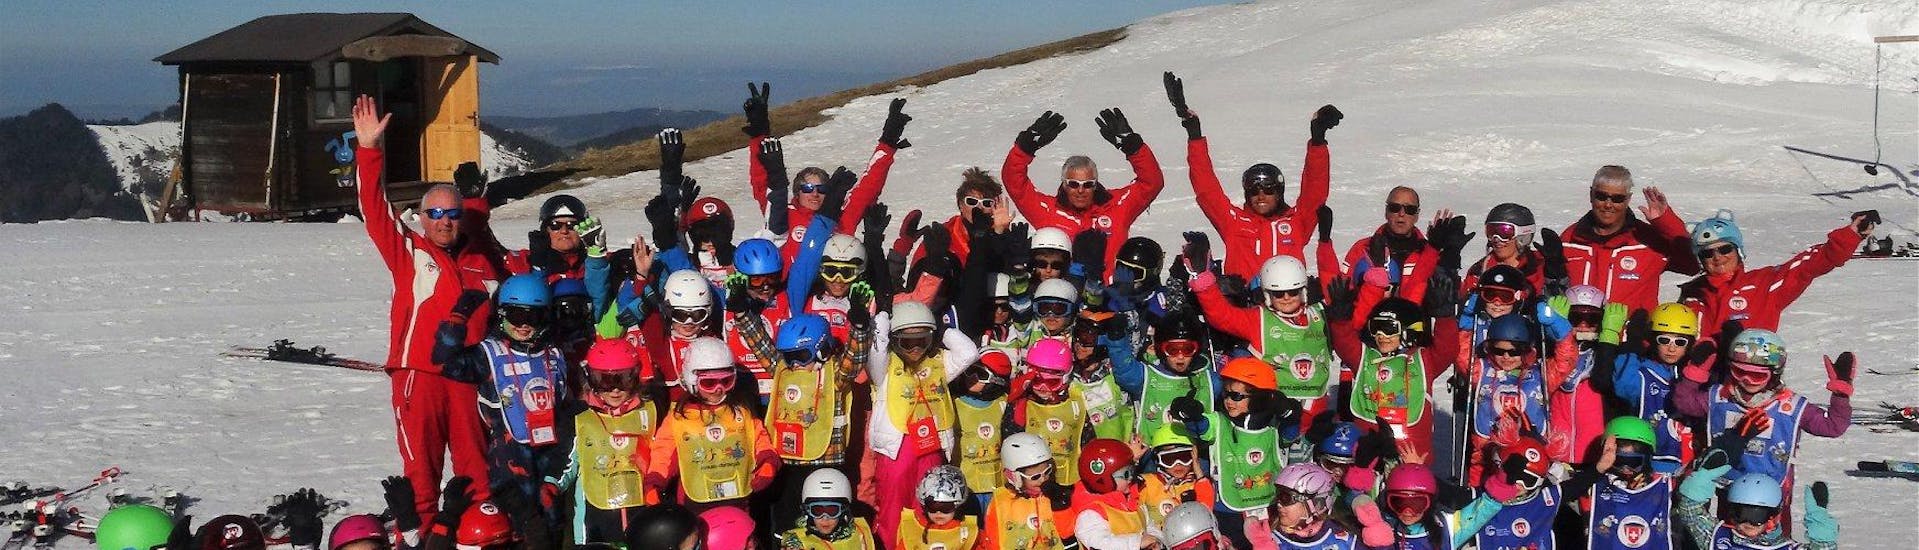 Students from the the swiss ski school Charmey and their ski instructors are gathered for a group photo celebrating their Kids Ski Lessons (6-15 years) - 1 day.